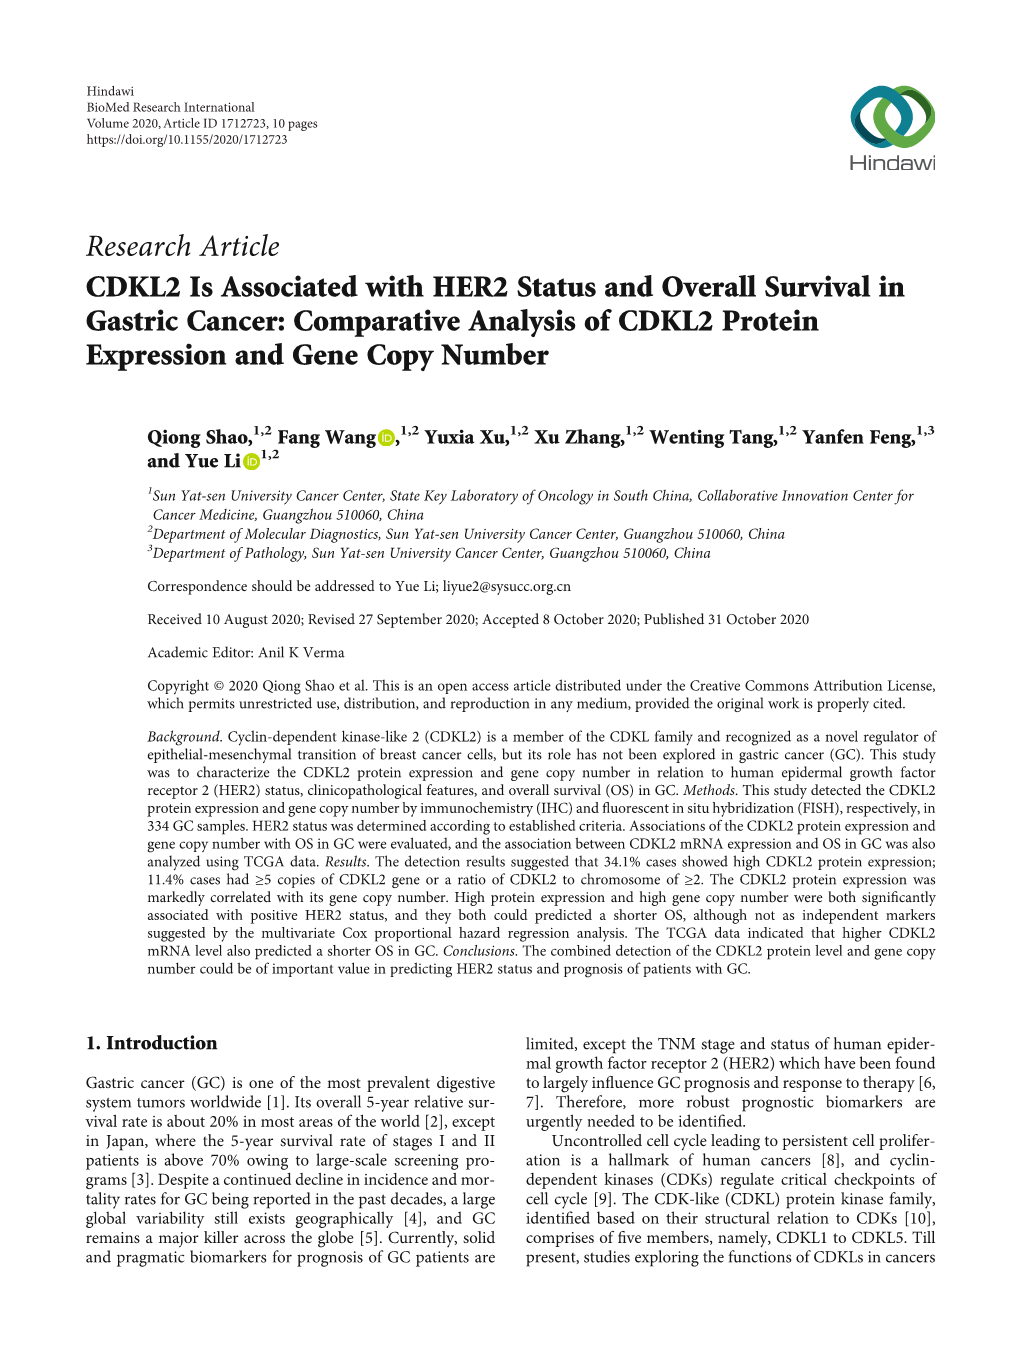 CDKL2 Is Associated with HER2 Status and Overall Survival in Gastric Cancer: Comparative Analysis of CDKL2 Protein Expression and Gene Copy Number